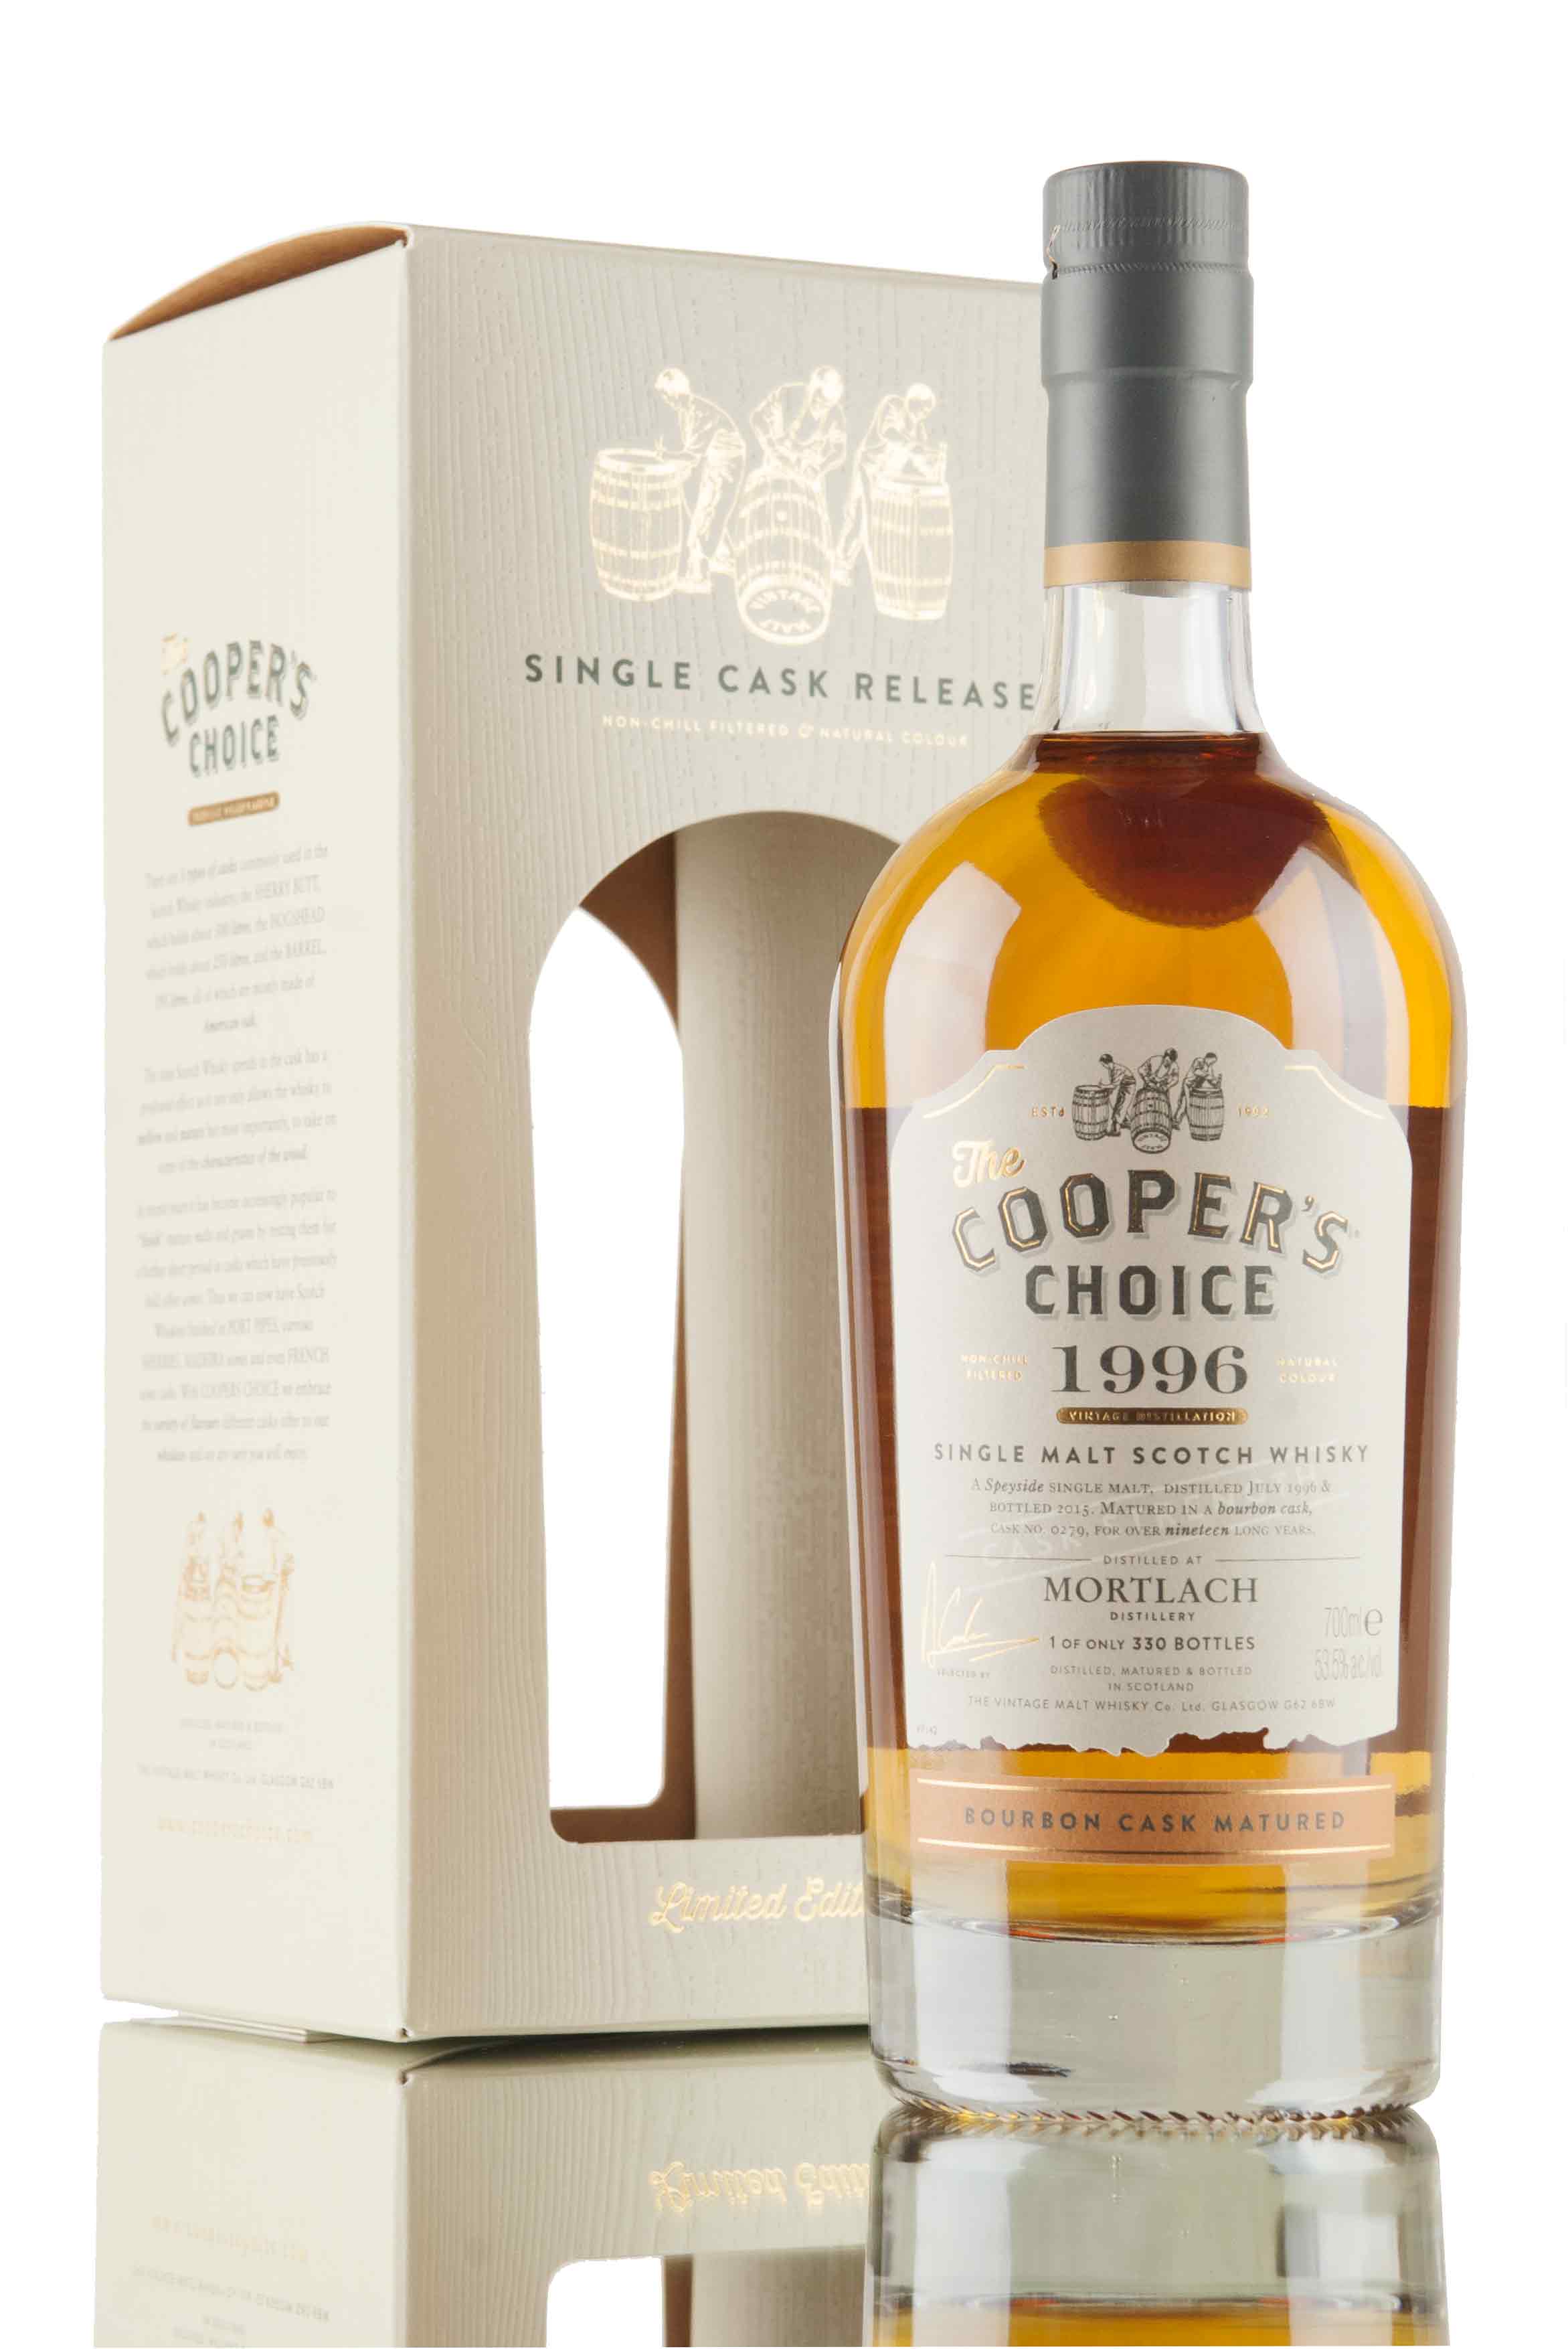 Mortlach 19 Year Old - 1996 / Single Cask #0279 / Cooper's Choice